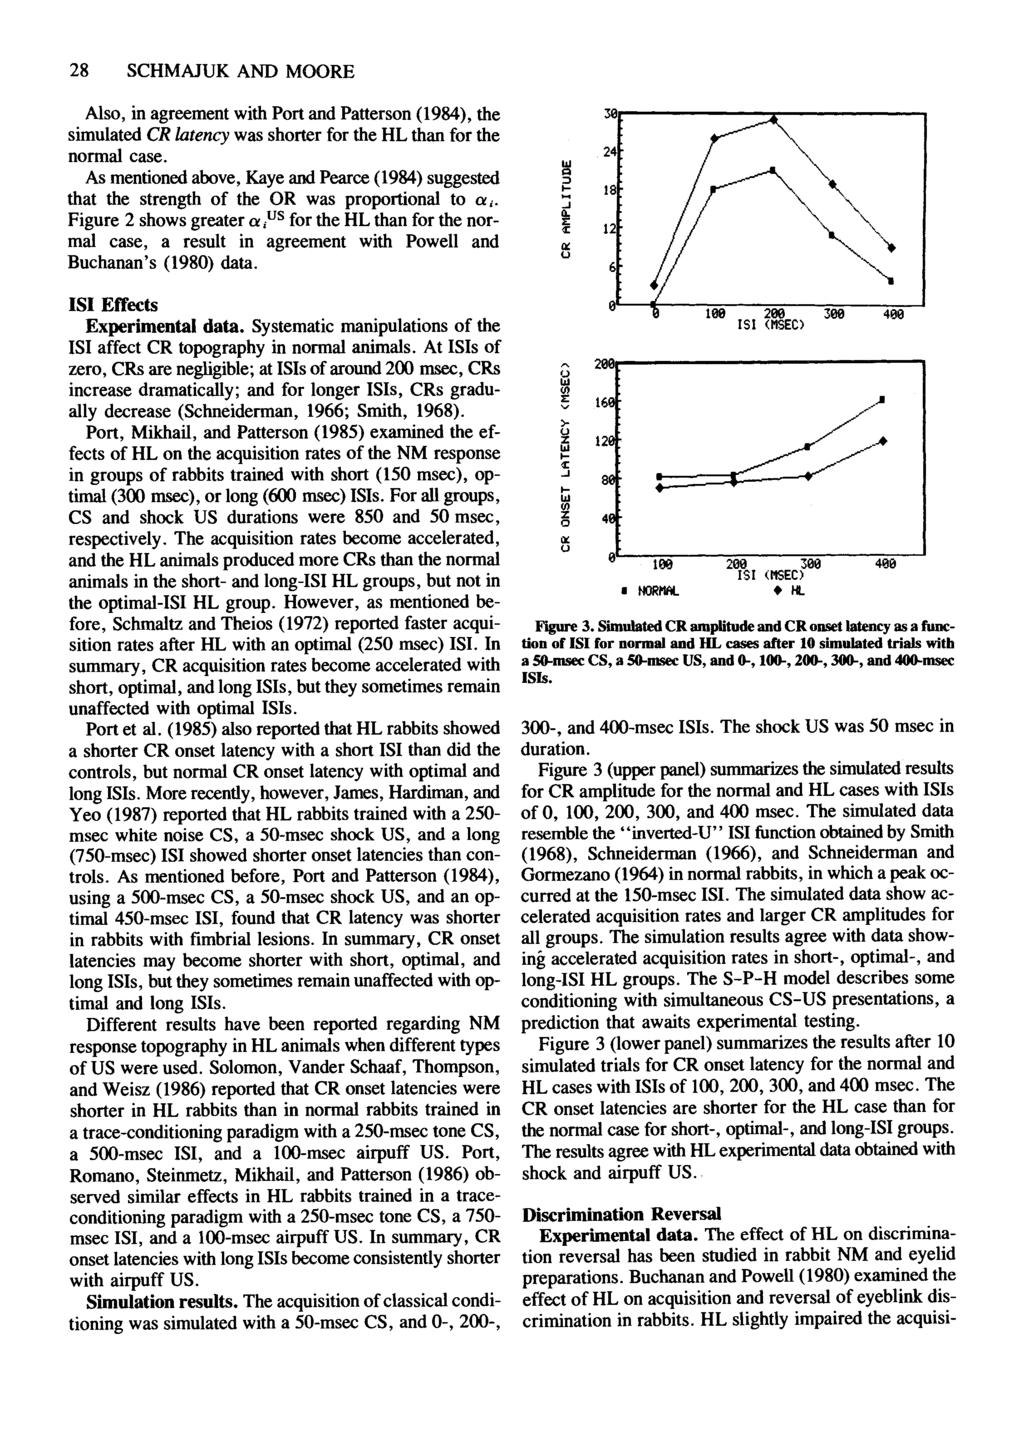 28 SCHMJUK ND MOORE lso, in agreement with Port and Patterson (1984), the simulated er latency was shorter for the HL than for the normal ease.